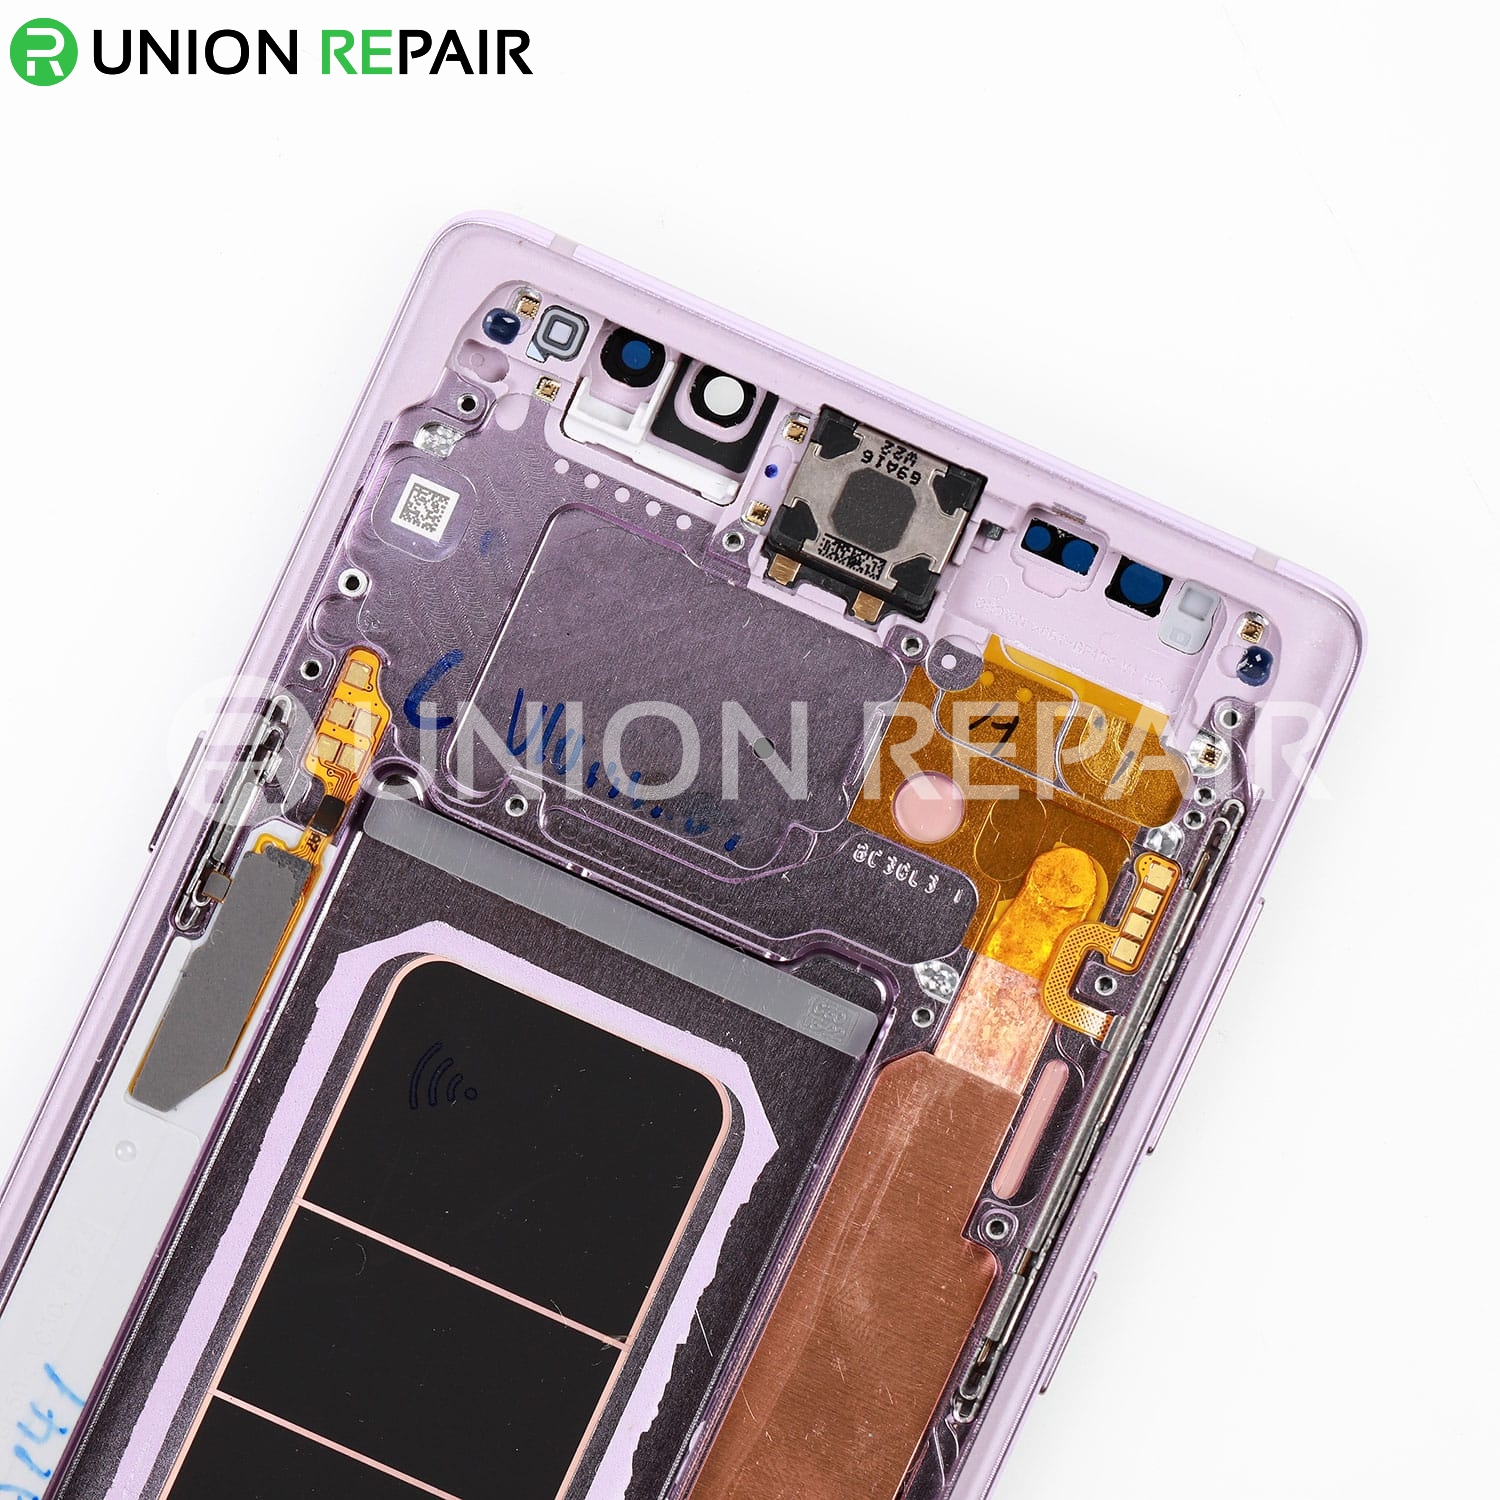 Replacement for Samsung Galaxy Note 9 LCD Screen Assembly with Frame - PurpleReplacement for Samsung Galaxy Note 9 LCD Screen Assembly with Frame - Purple